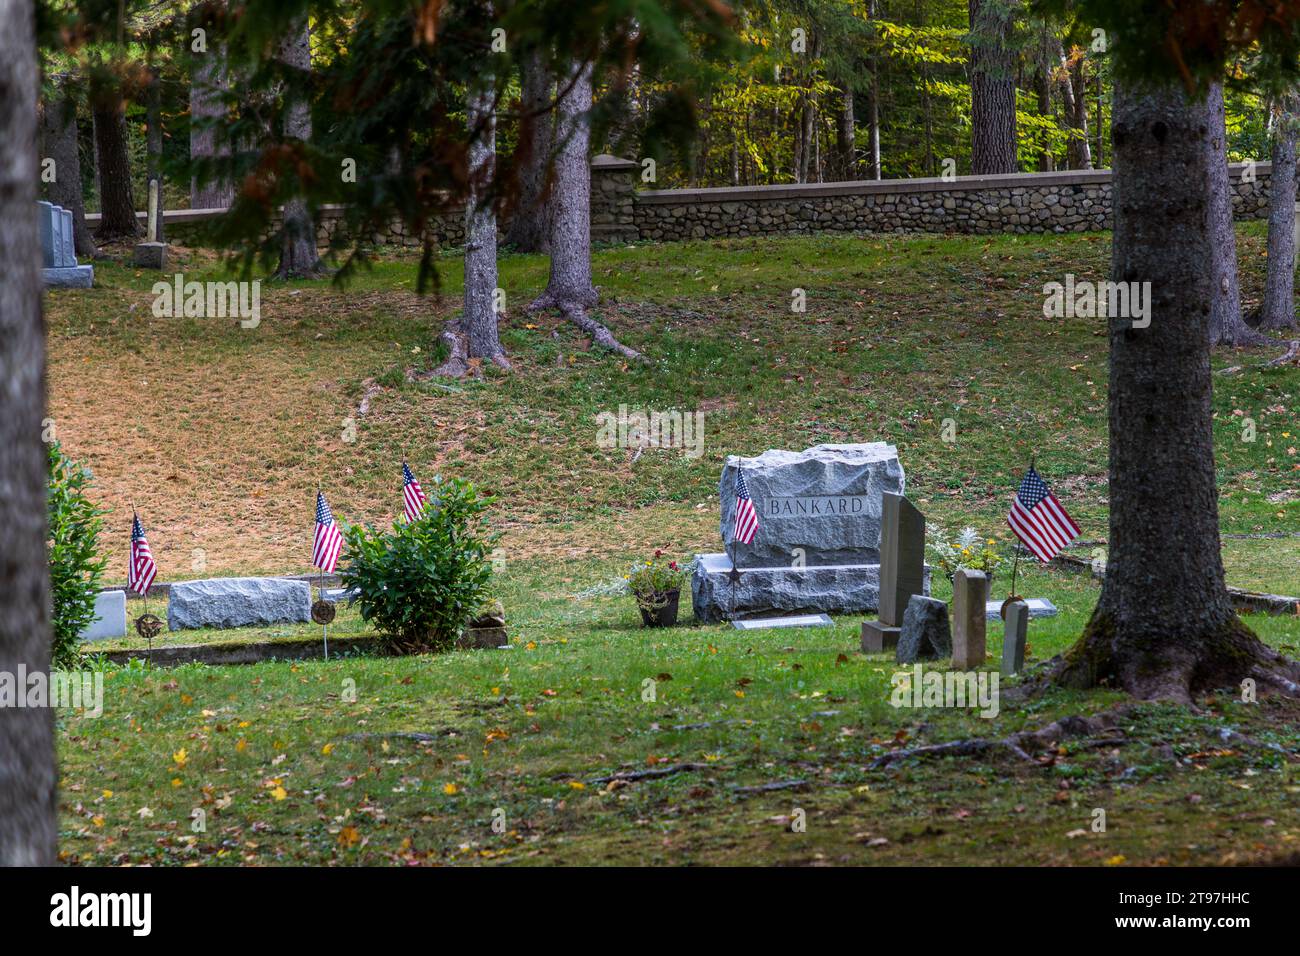 Saint Anne's Cemetery on Mackinac Island. The island has a diameter of 8 miles. Native American tribes use the island as a burial ground. Cemetery of the Mackinac Island garrison. Fort Mackinac Island, Michigan, United States Stock Photo